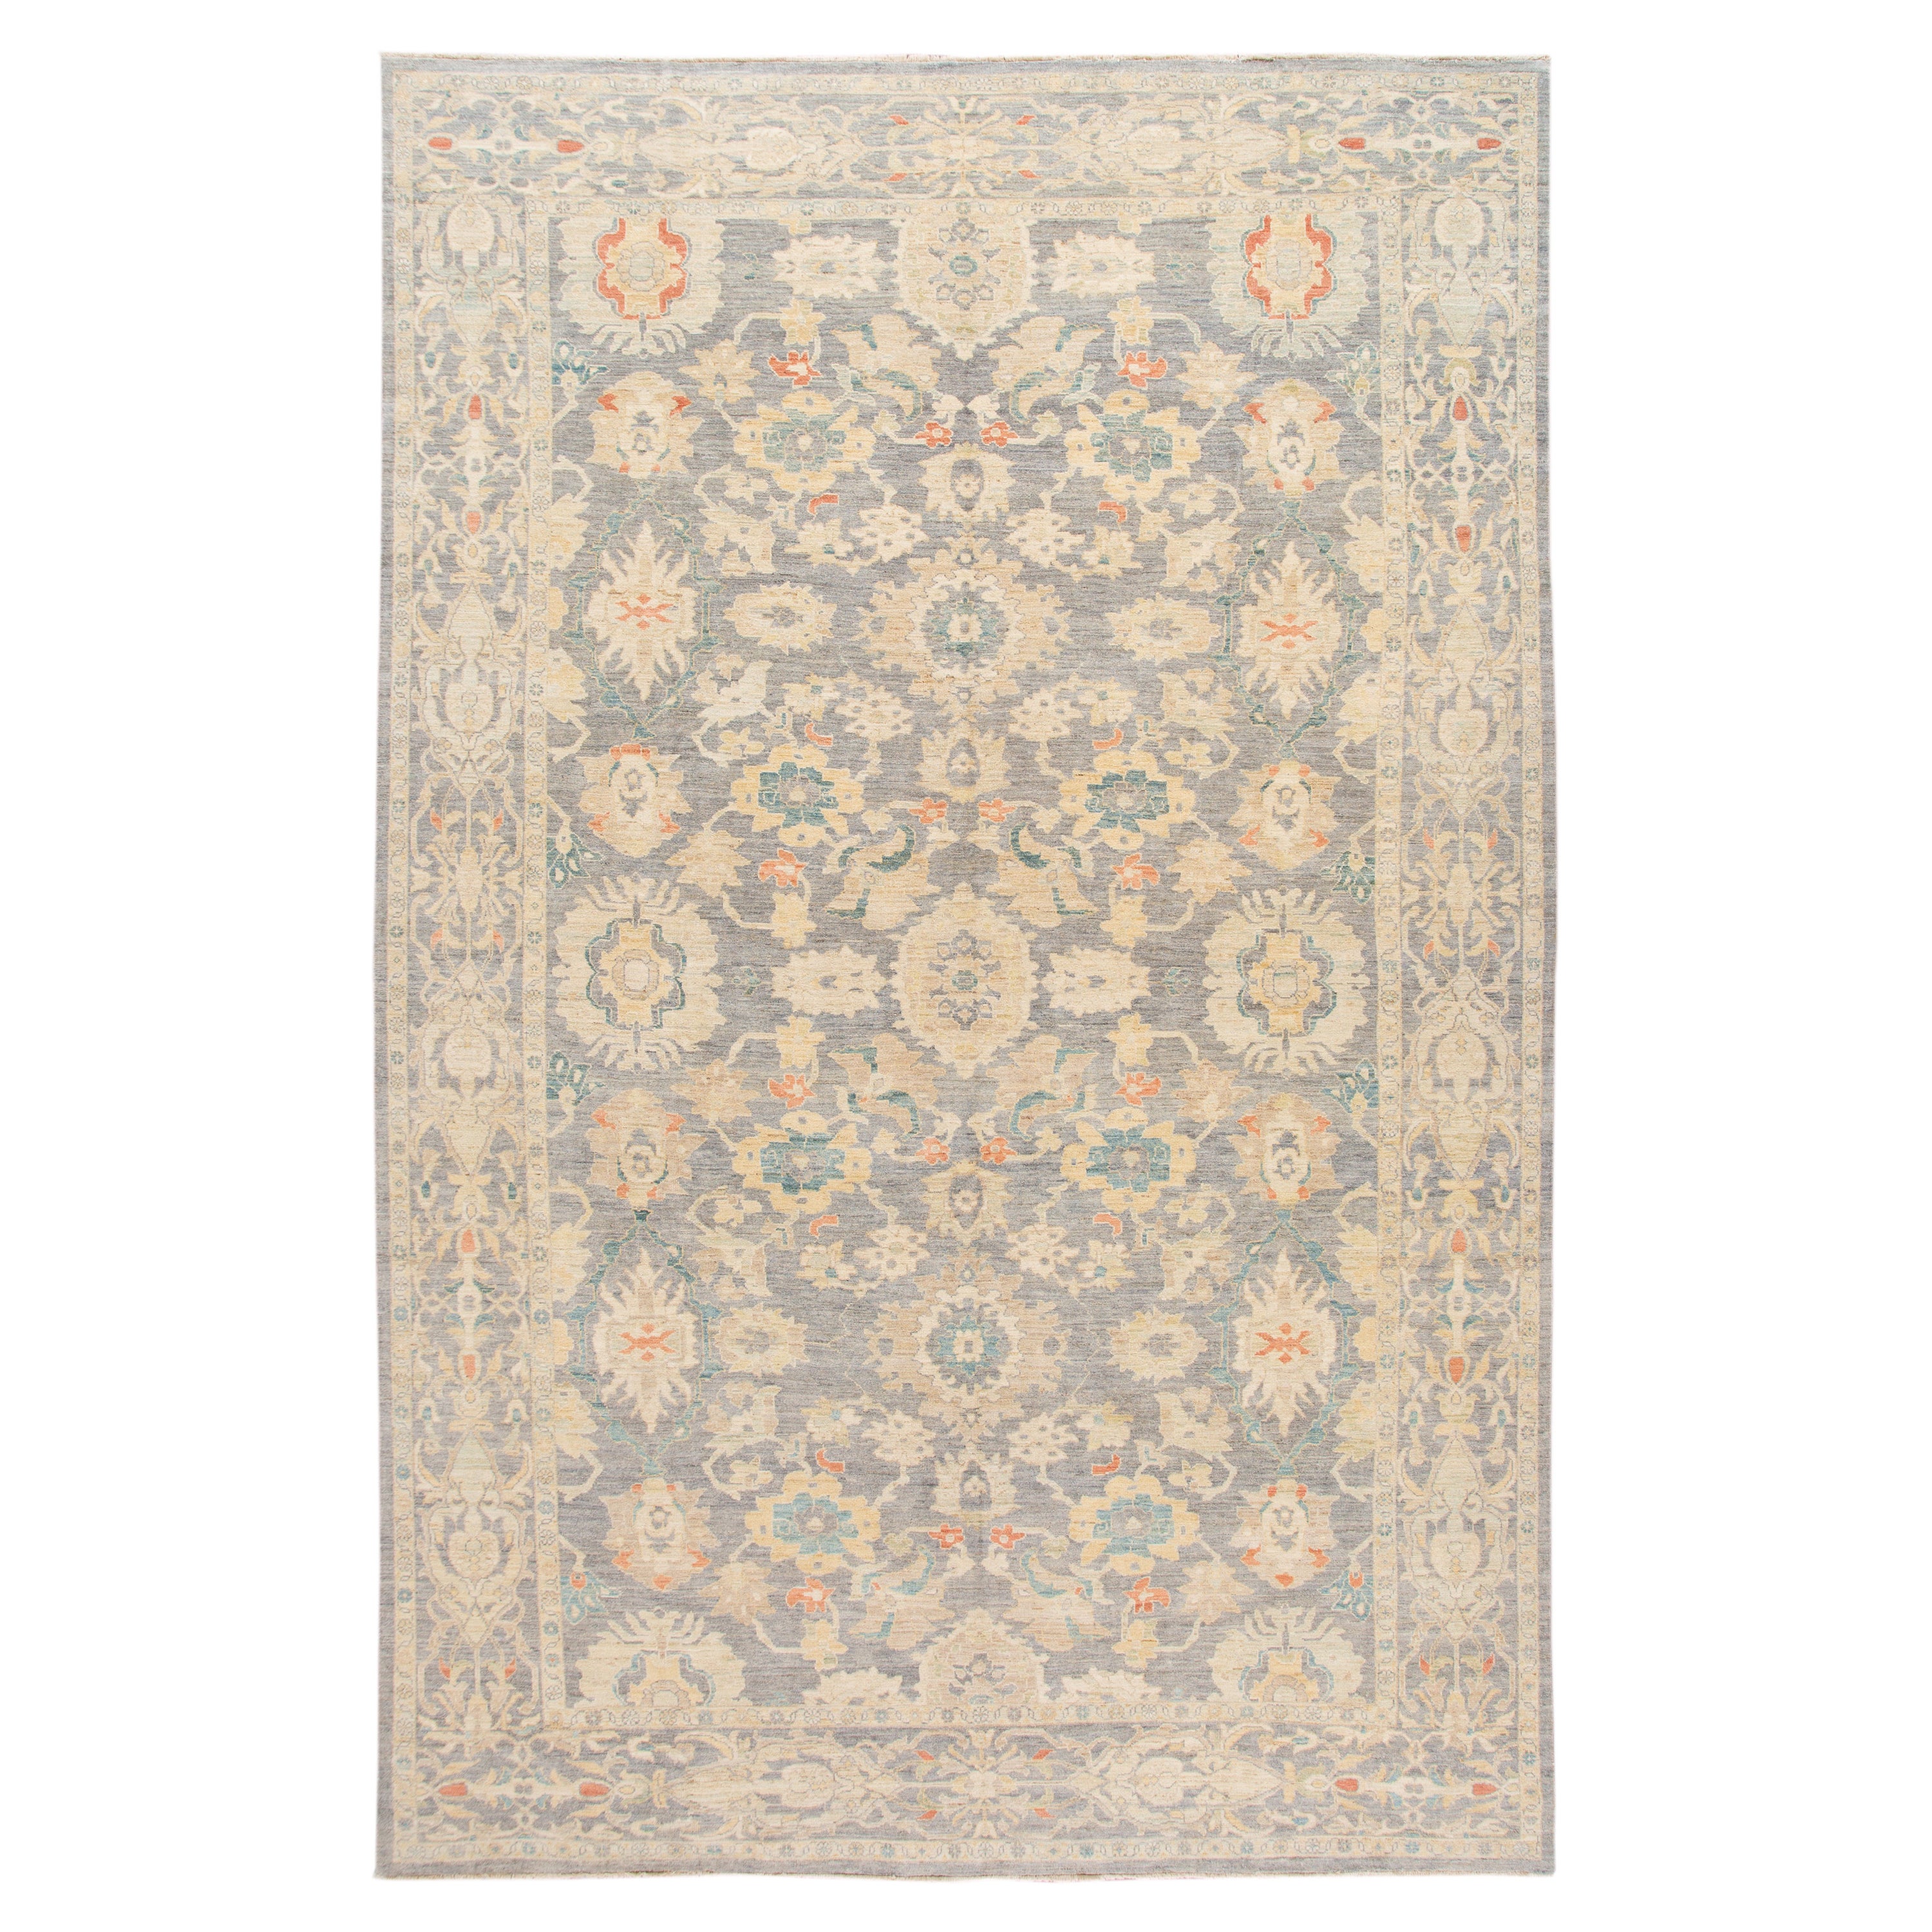 Handmade Gray Sultanabad Wool Rug Oversize Floral All-Over Design For Sale